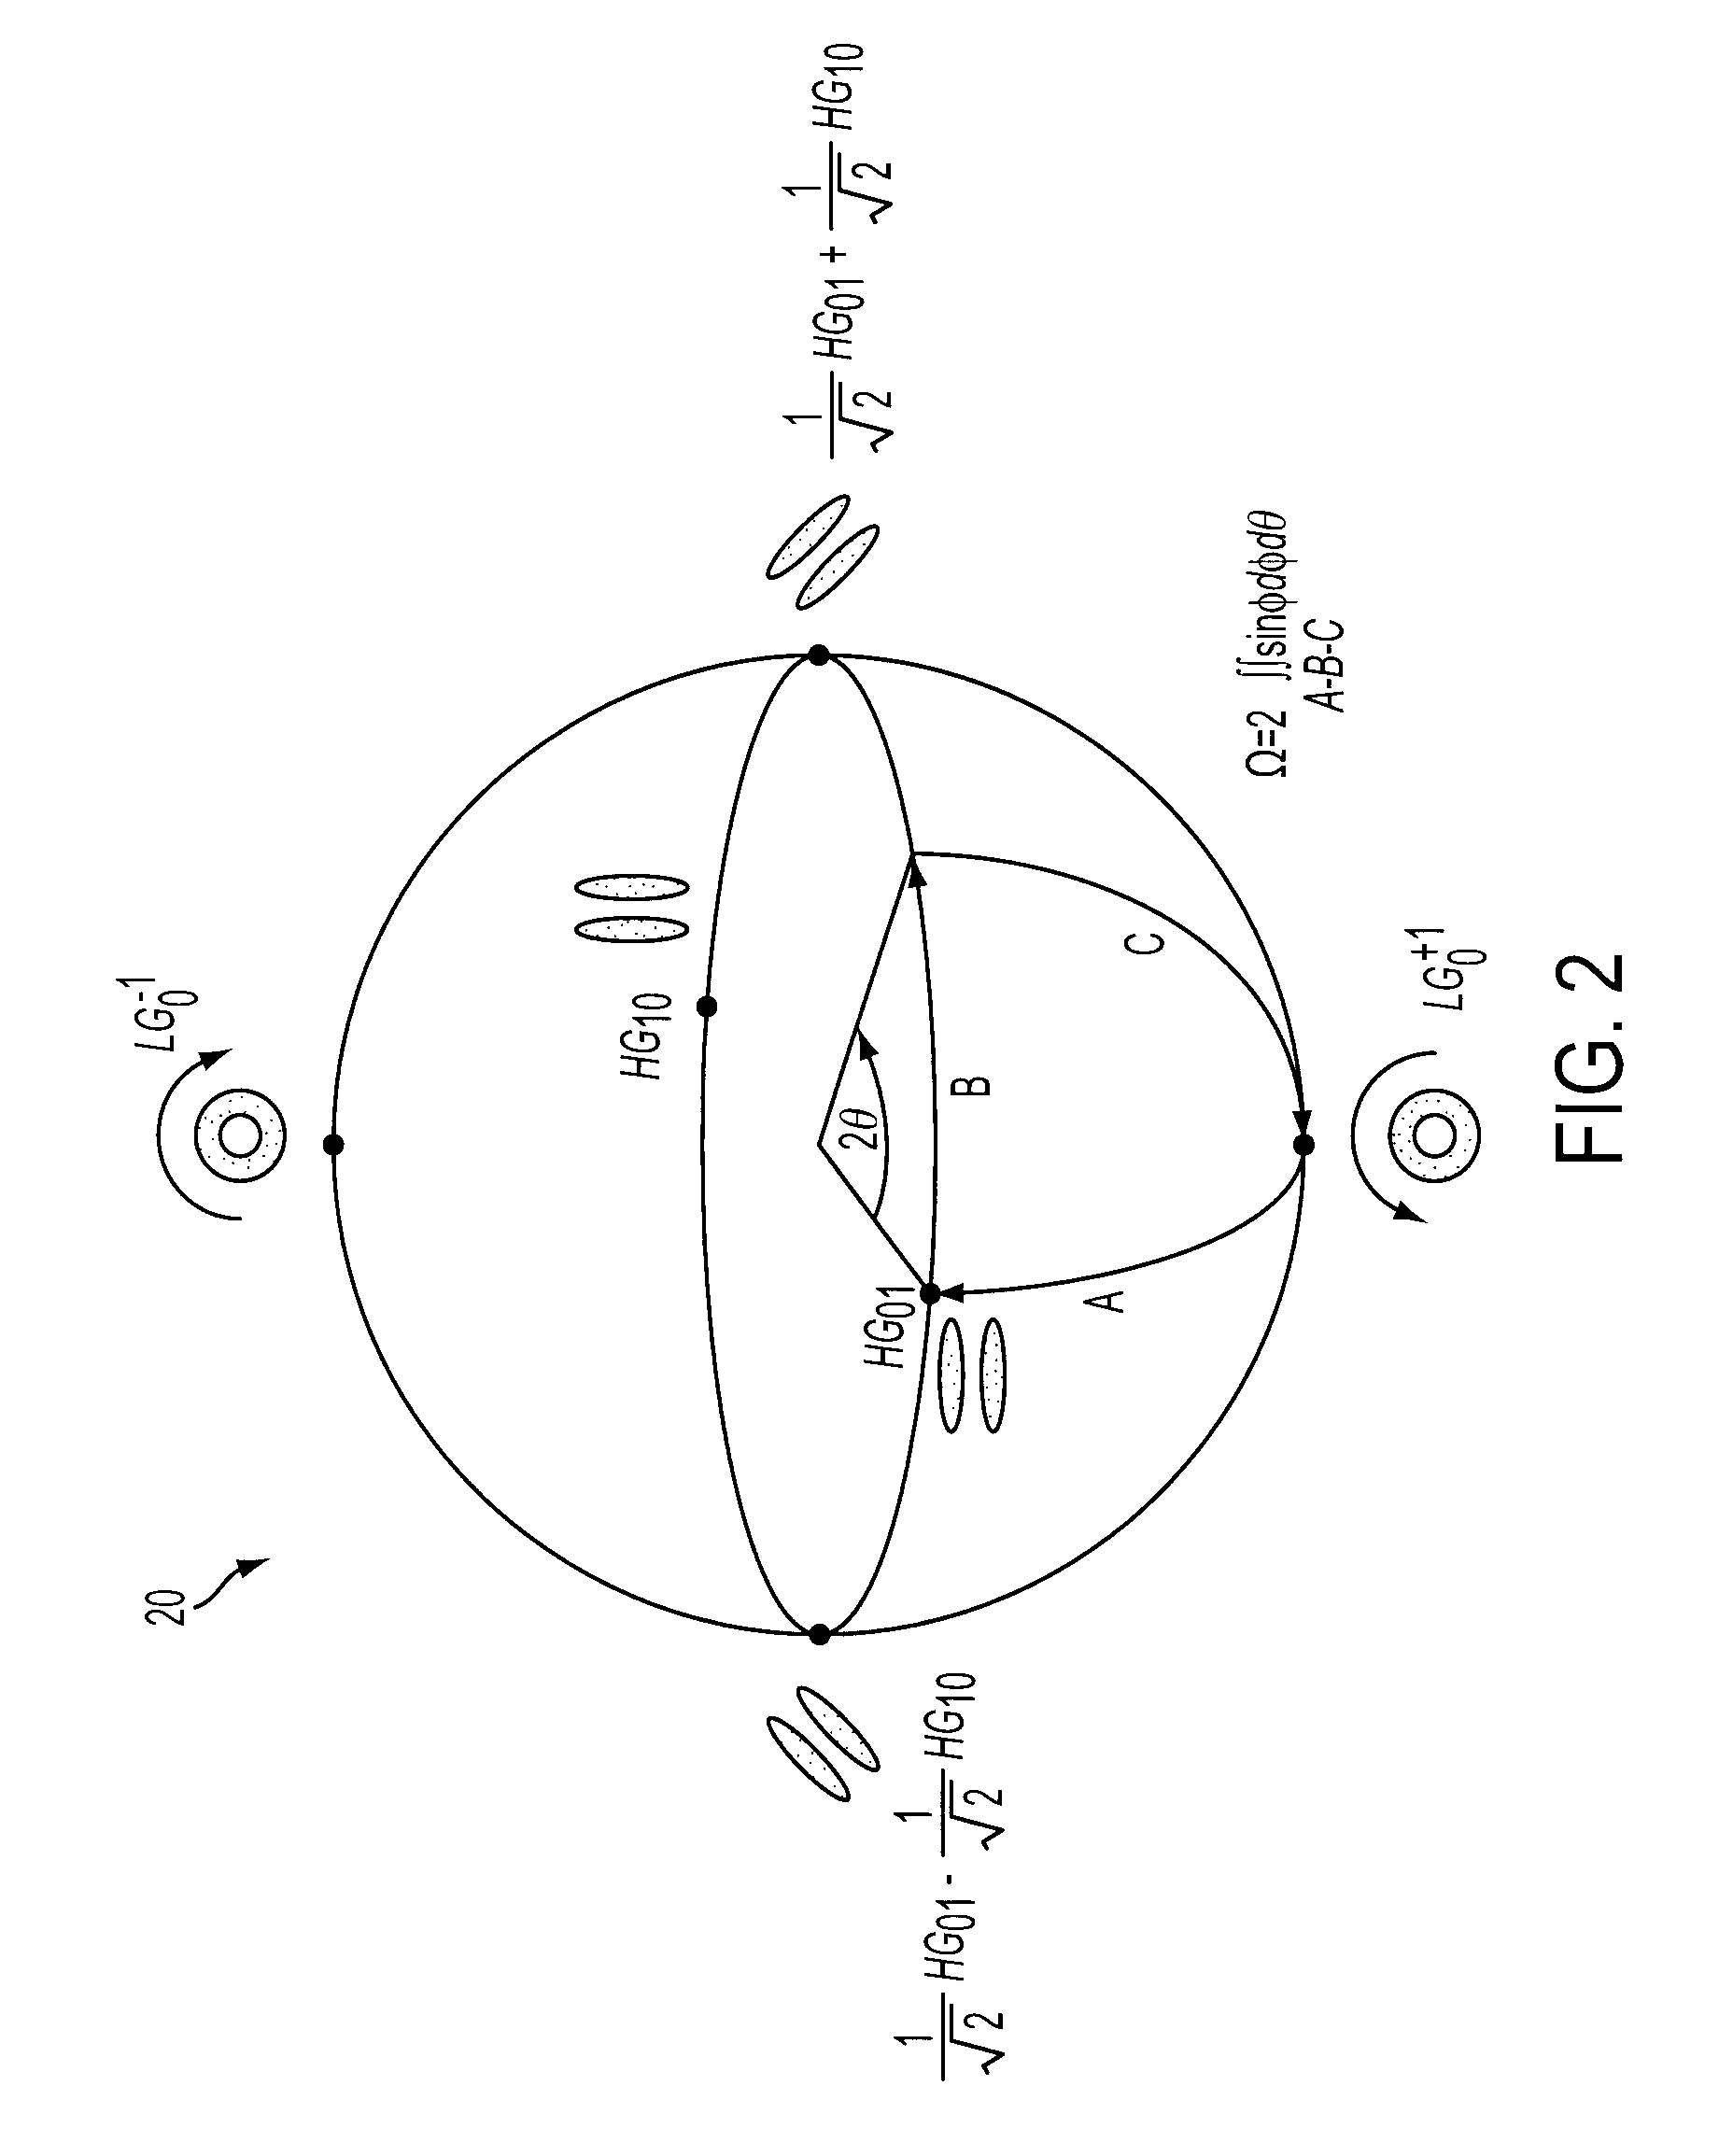 Method and apparatus relating to secure communication